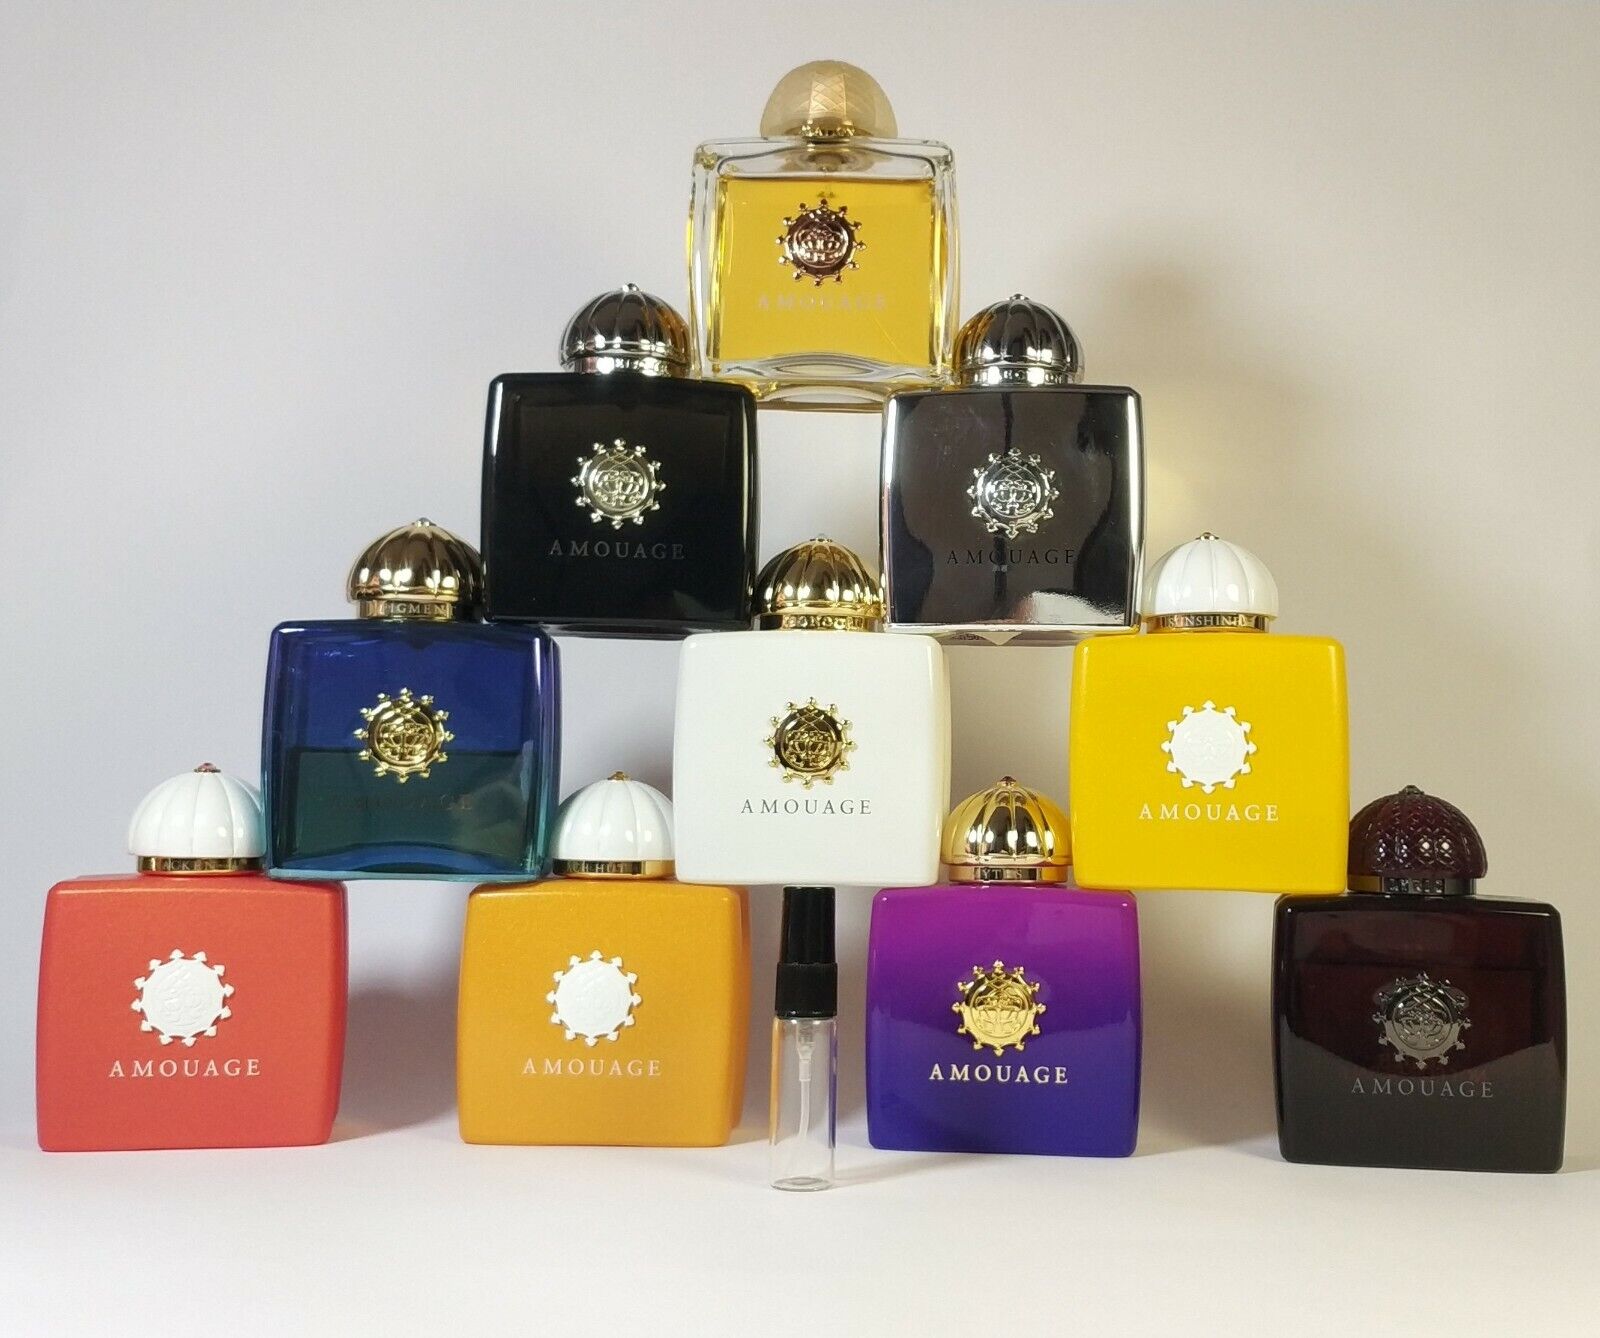 AMOUAGE perfumes. Choose New Shipping Free what you Sale want 5ml 1ml try. 10ml. or to